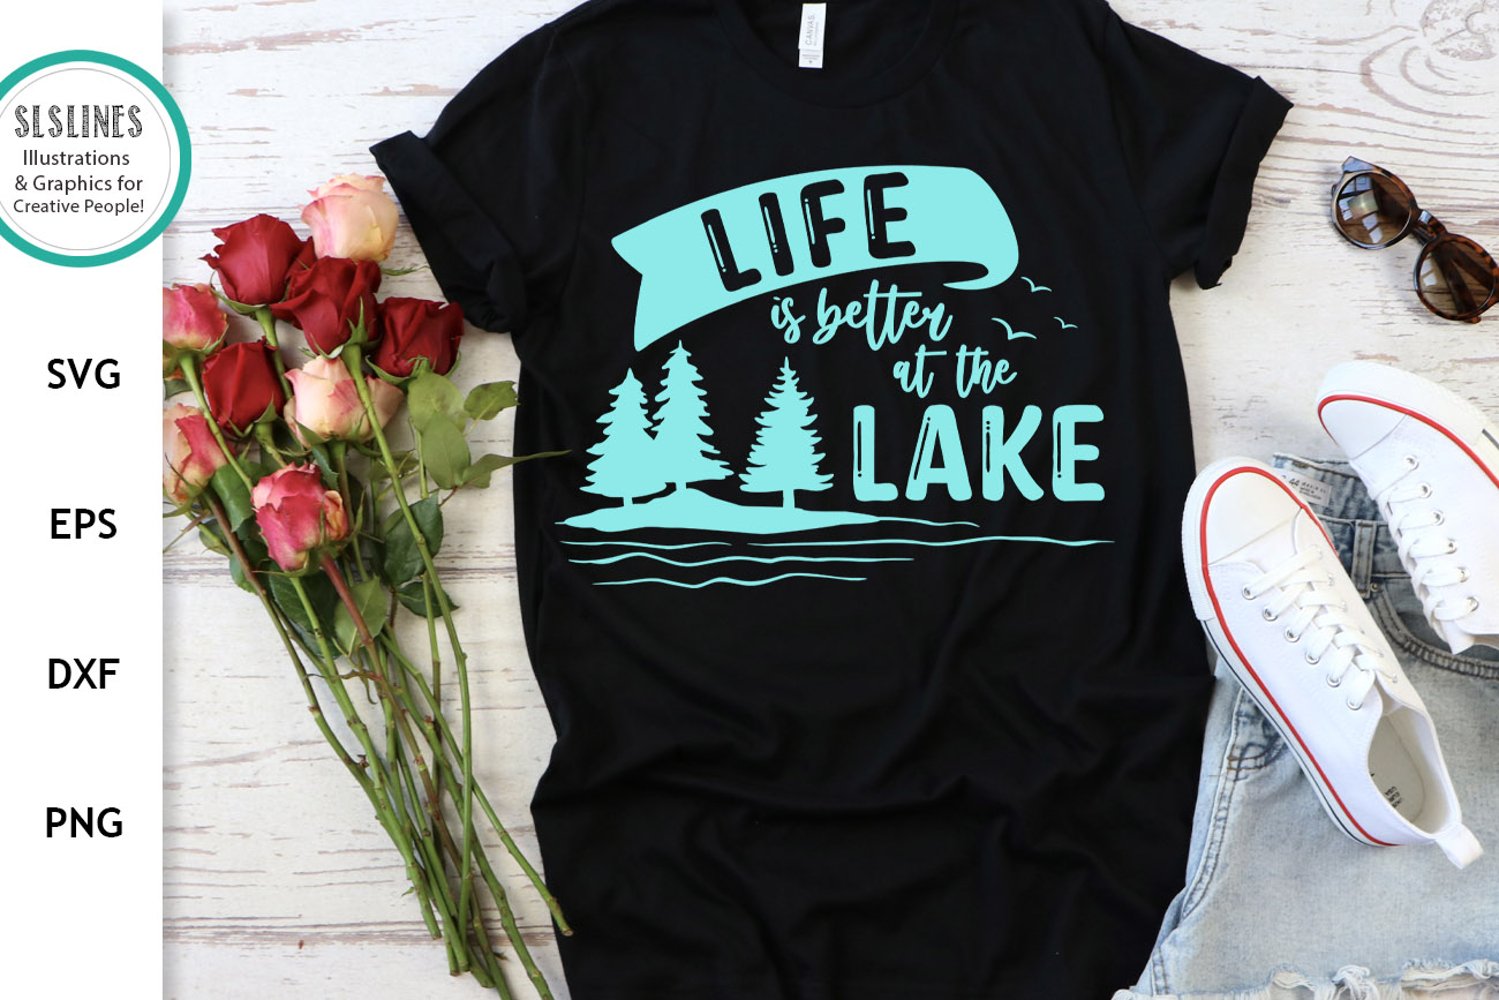 Life is better at the lake - black t-shirt design.